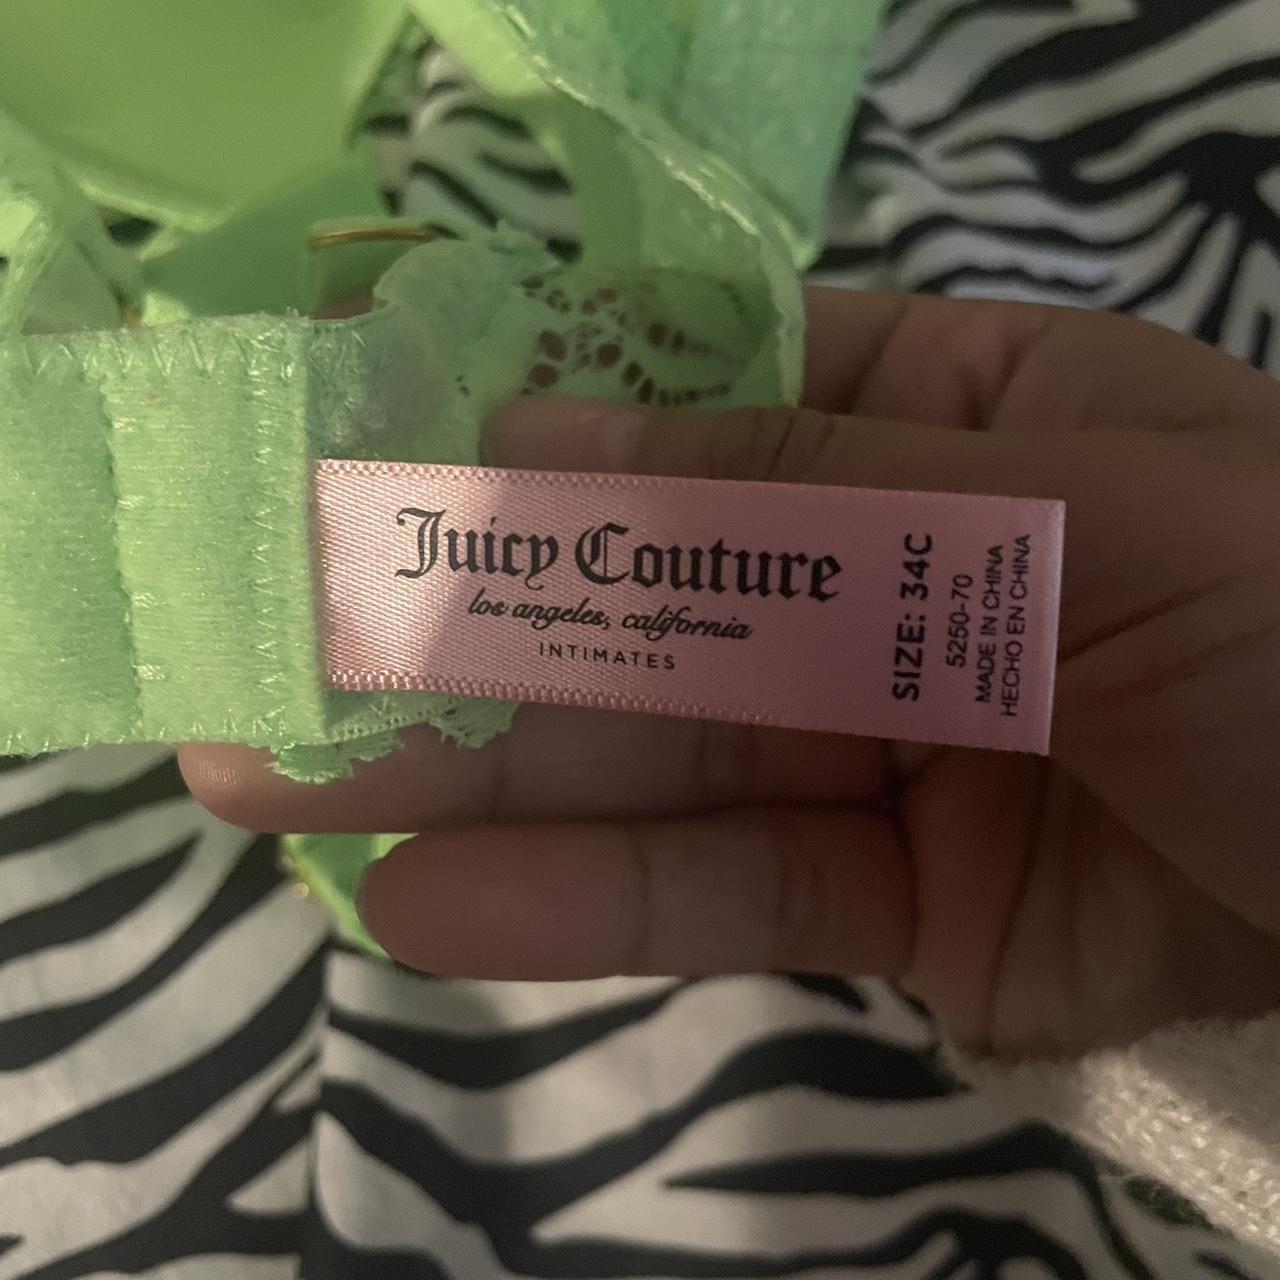 Juicy Couture Bra Padded Tie Dye Push Up with - Depop